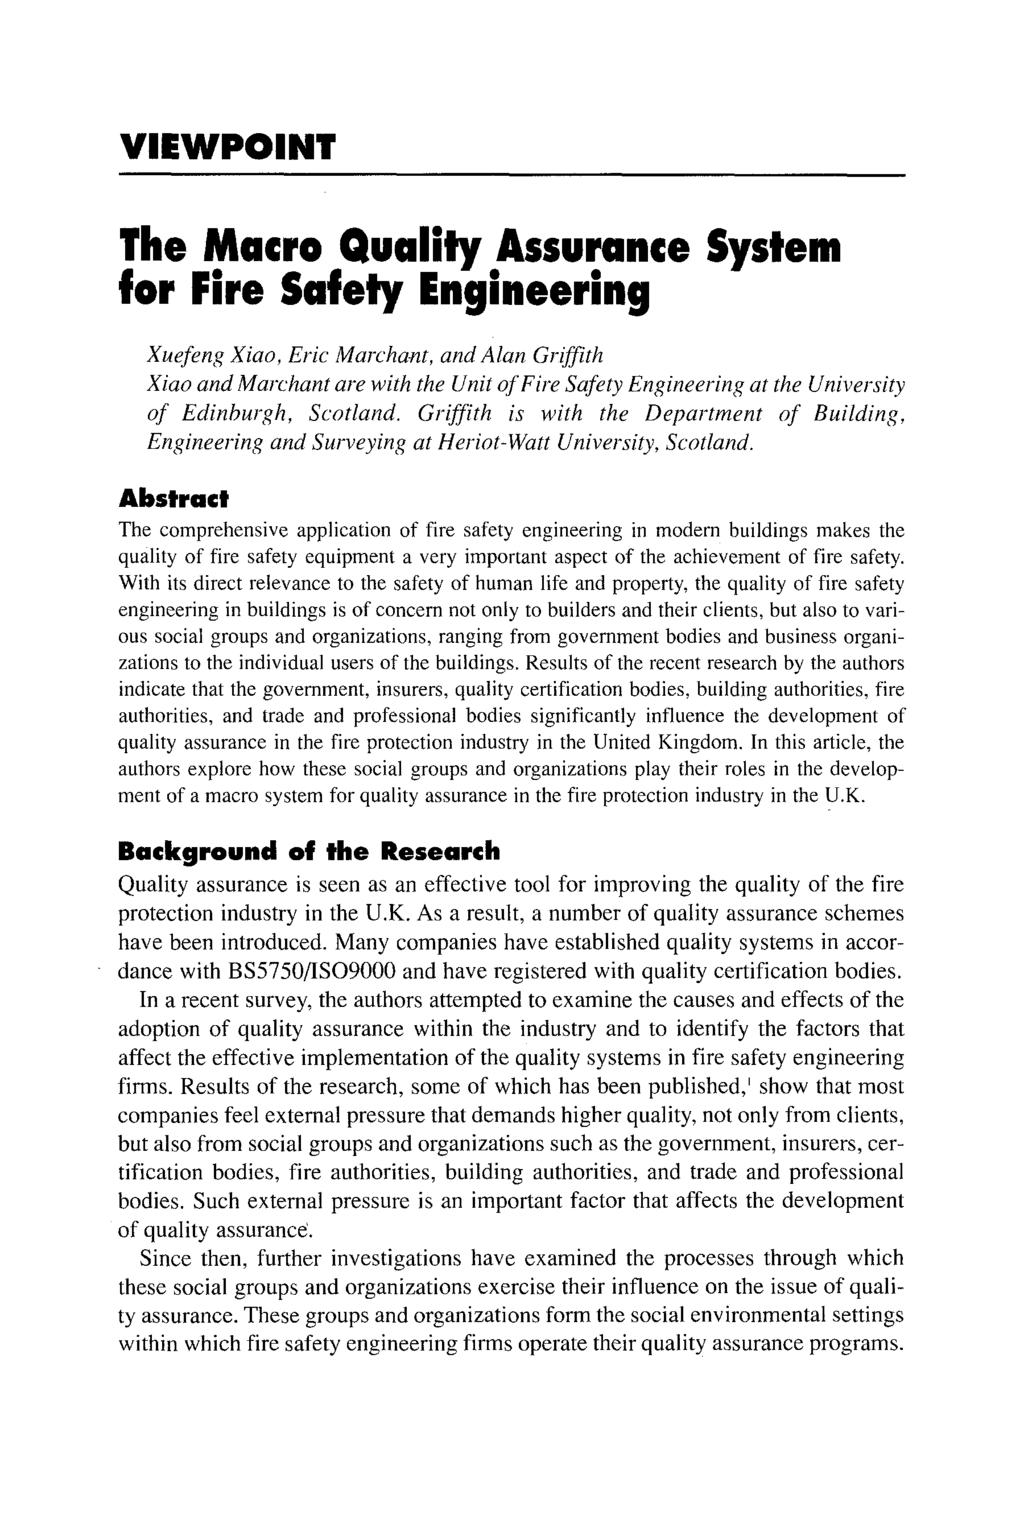 VIEWPOINT The Macro Quallty Assurance System for Fire Safety Engineering Xuefeng Xiao, Eric Marcha-nt, and Alan Griß'th Xiao and Marchant are with the Unit of Fite Safety Engineering at the